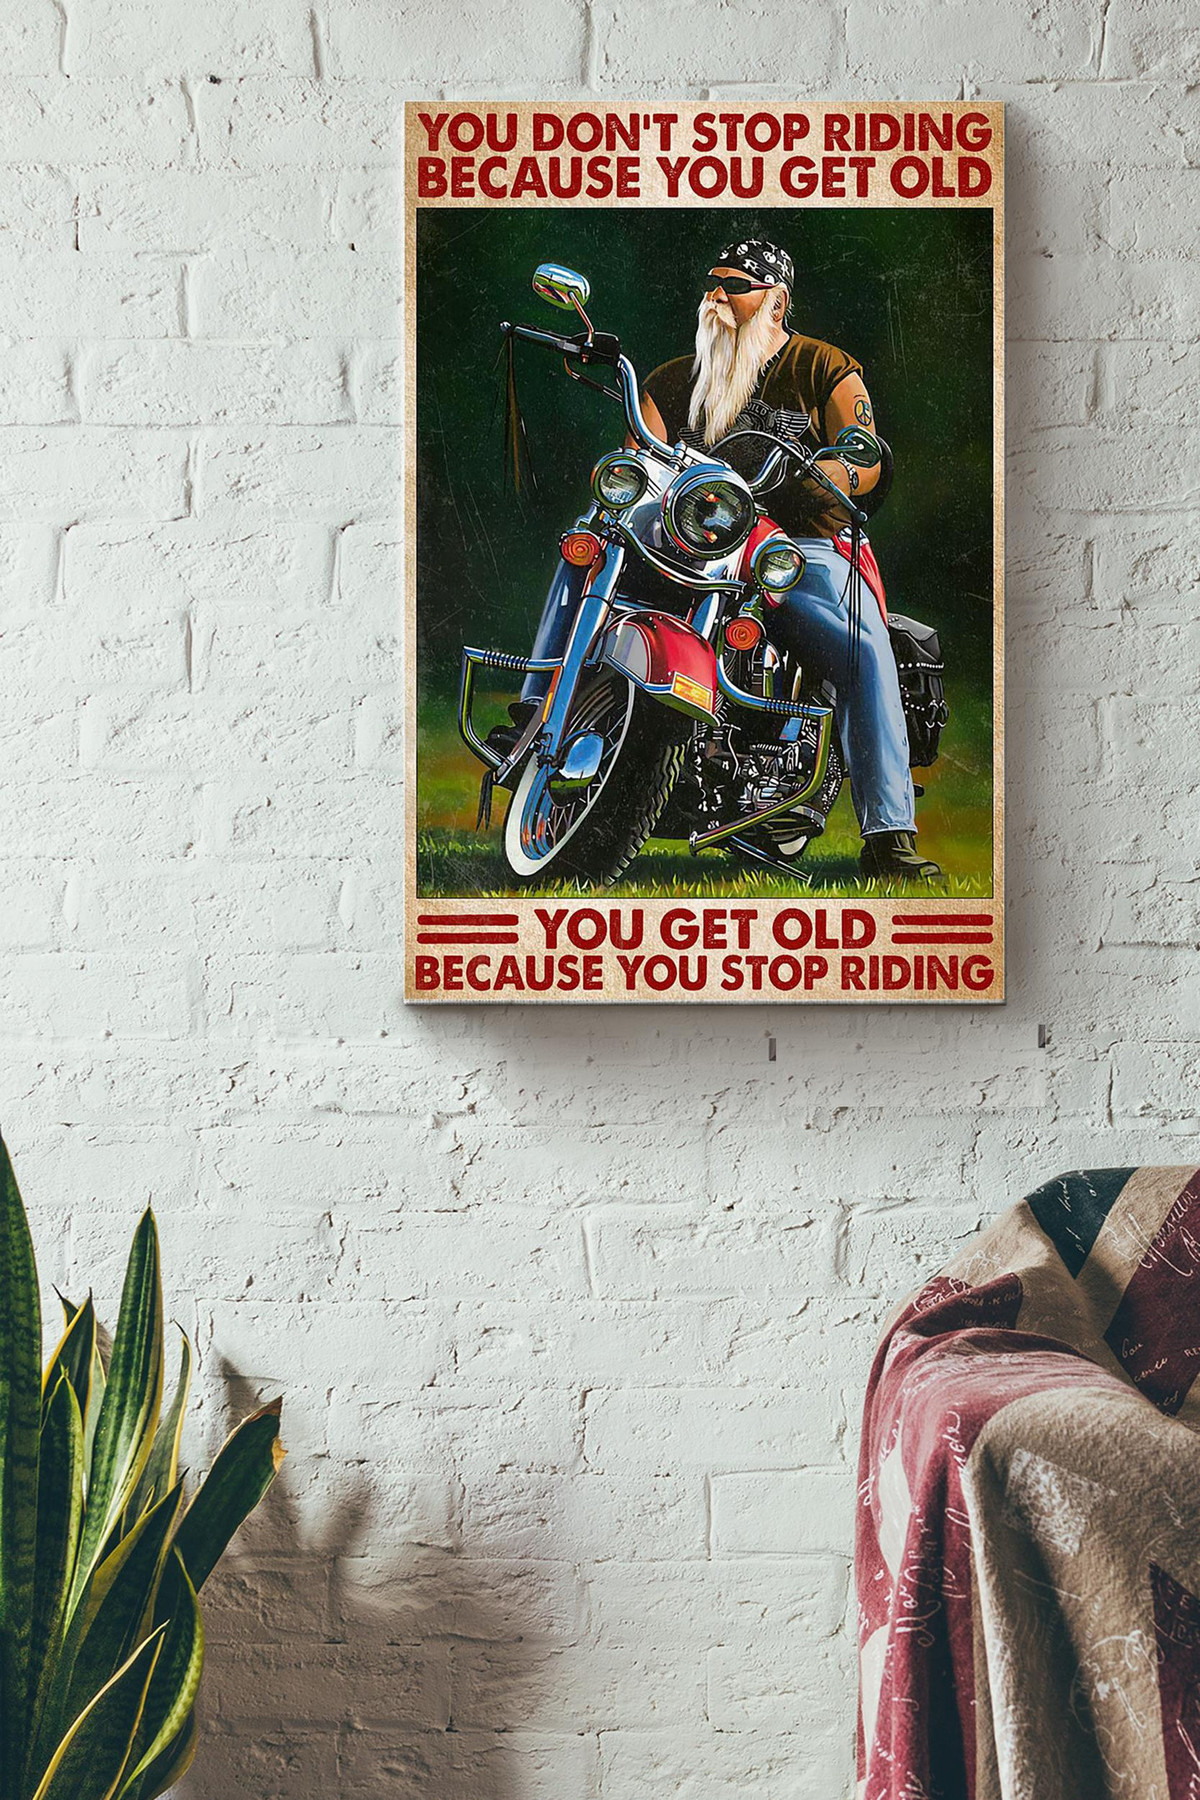 You Dont Stop Riding Motorbike When You Get Old You Get Old When You Stop Riding Motorbike Old Man Racer Canvas Painting Ideas, Canvas Hanging Prints, Gift Idea Framed Prints, Canvas Paintings Wrapped Canvas 8x10